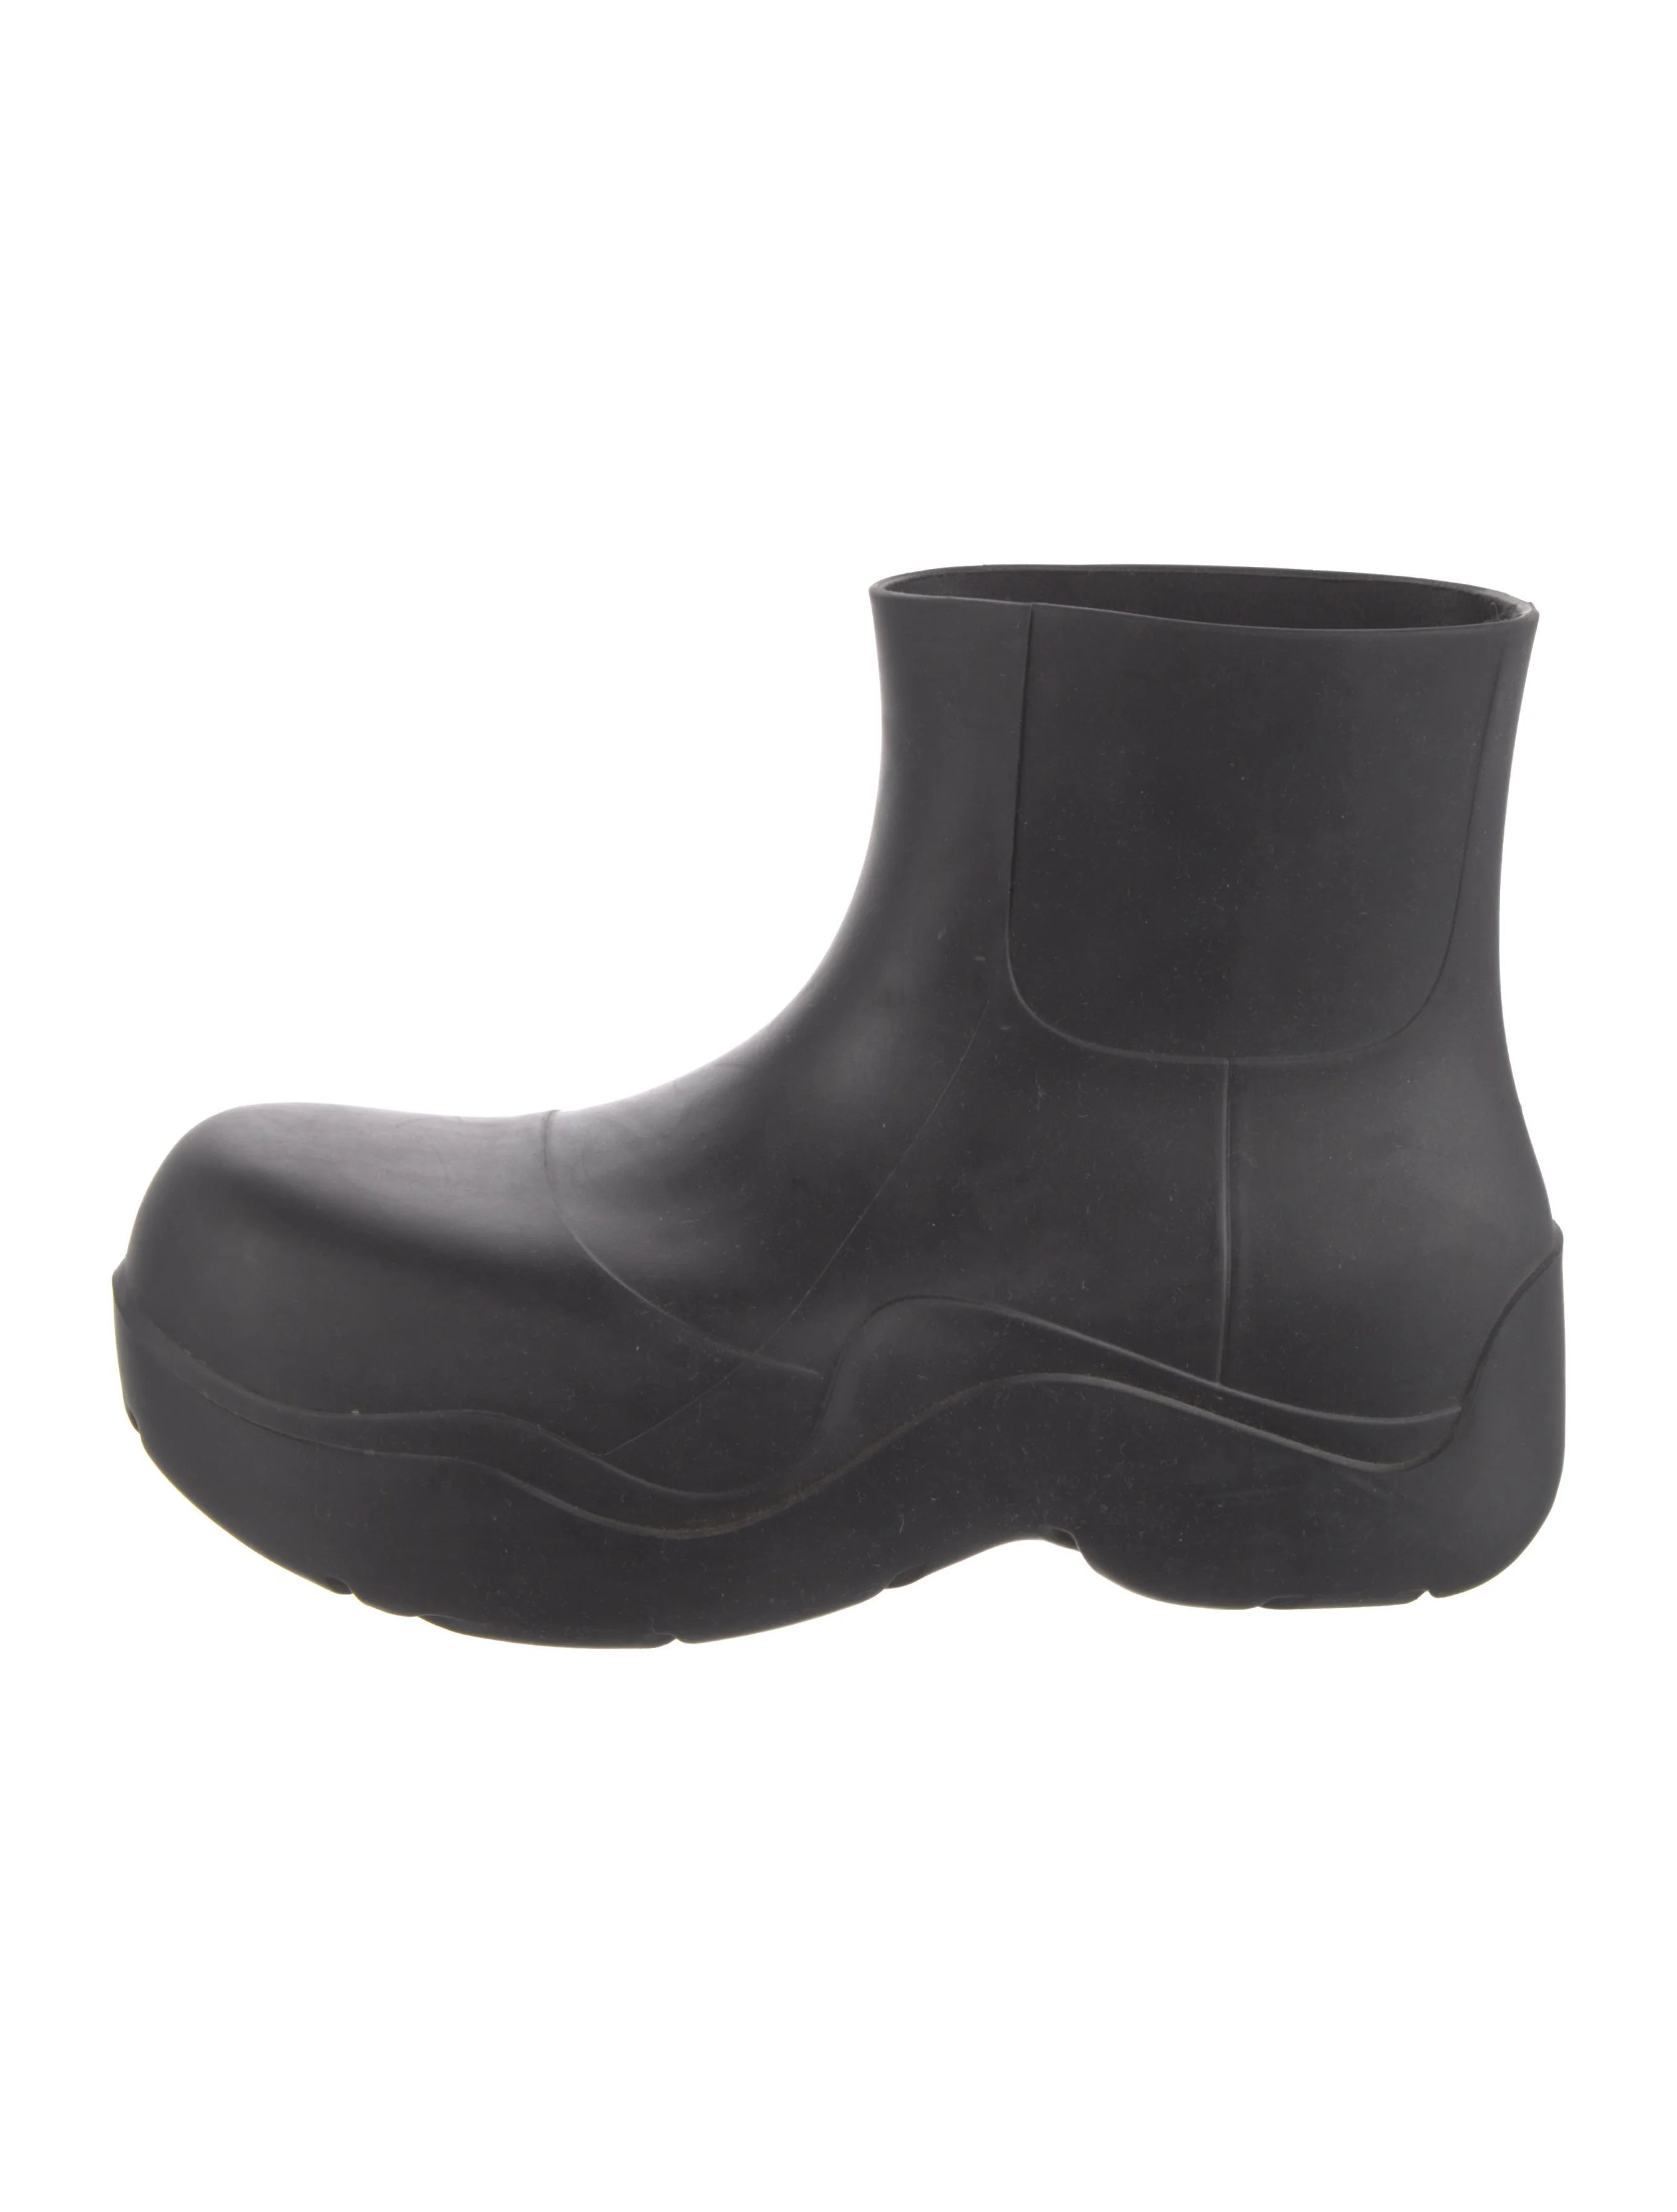 Rubber Rain Boots | The RealReal